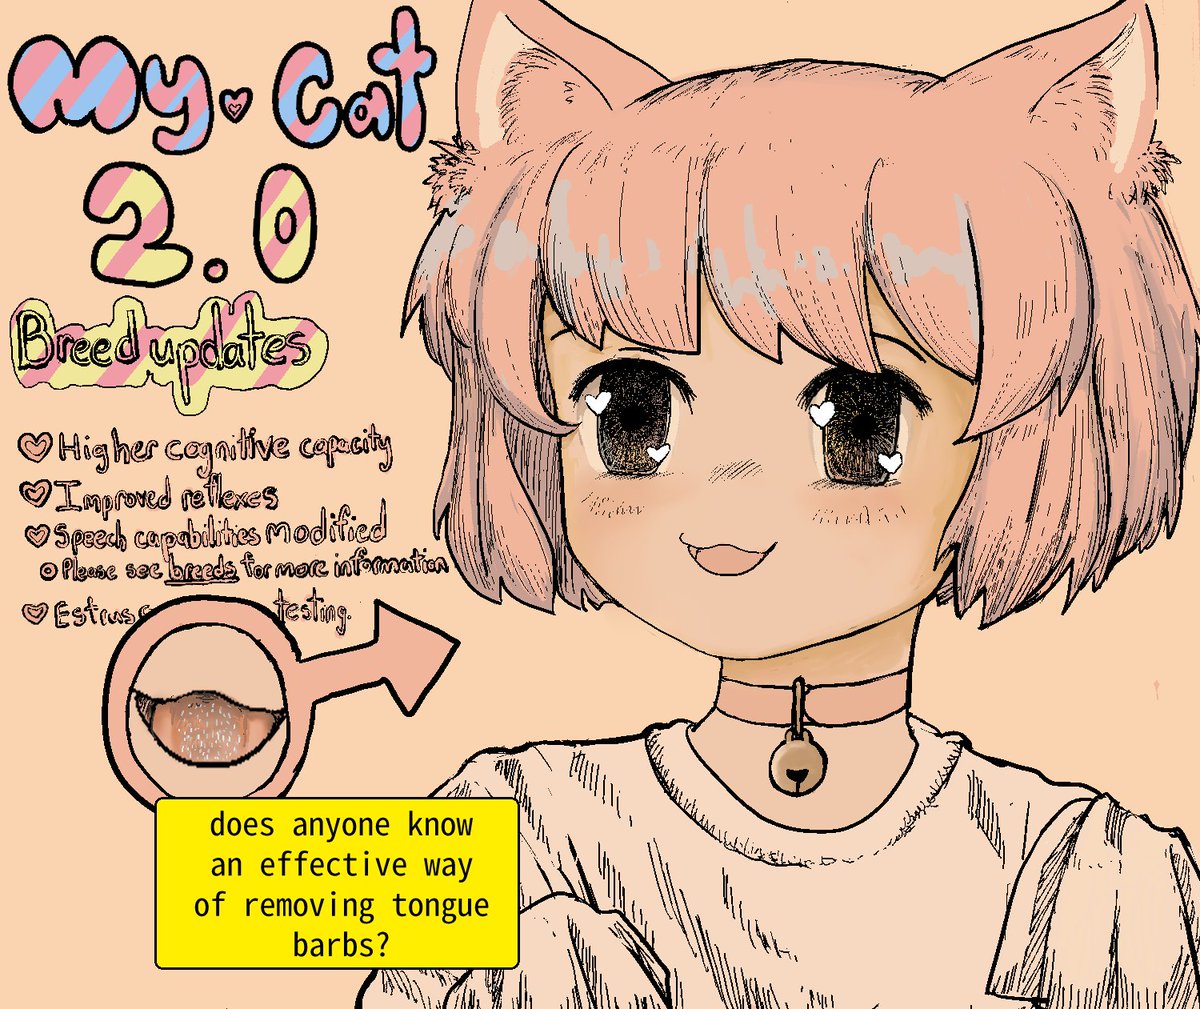 Steam Curator: Genetically Engineered Cat-Girls for Domestic Ownership